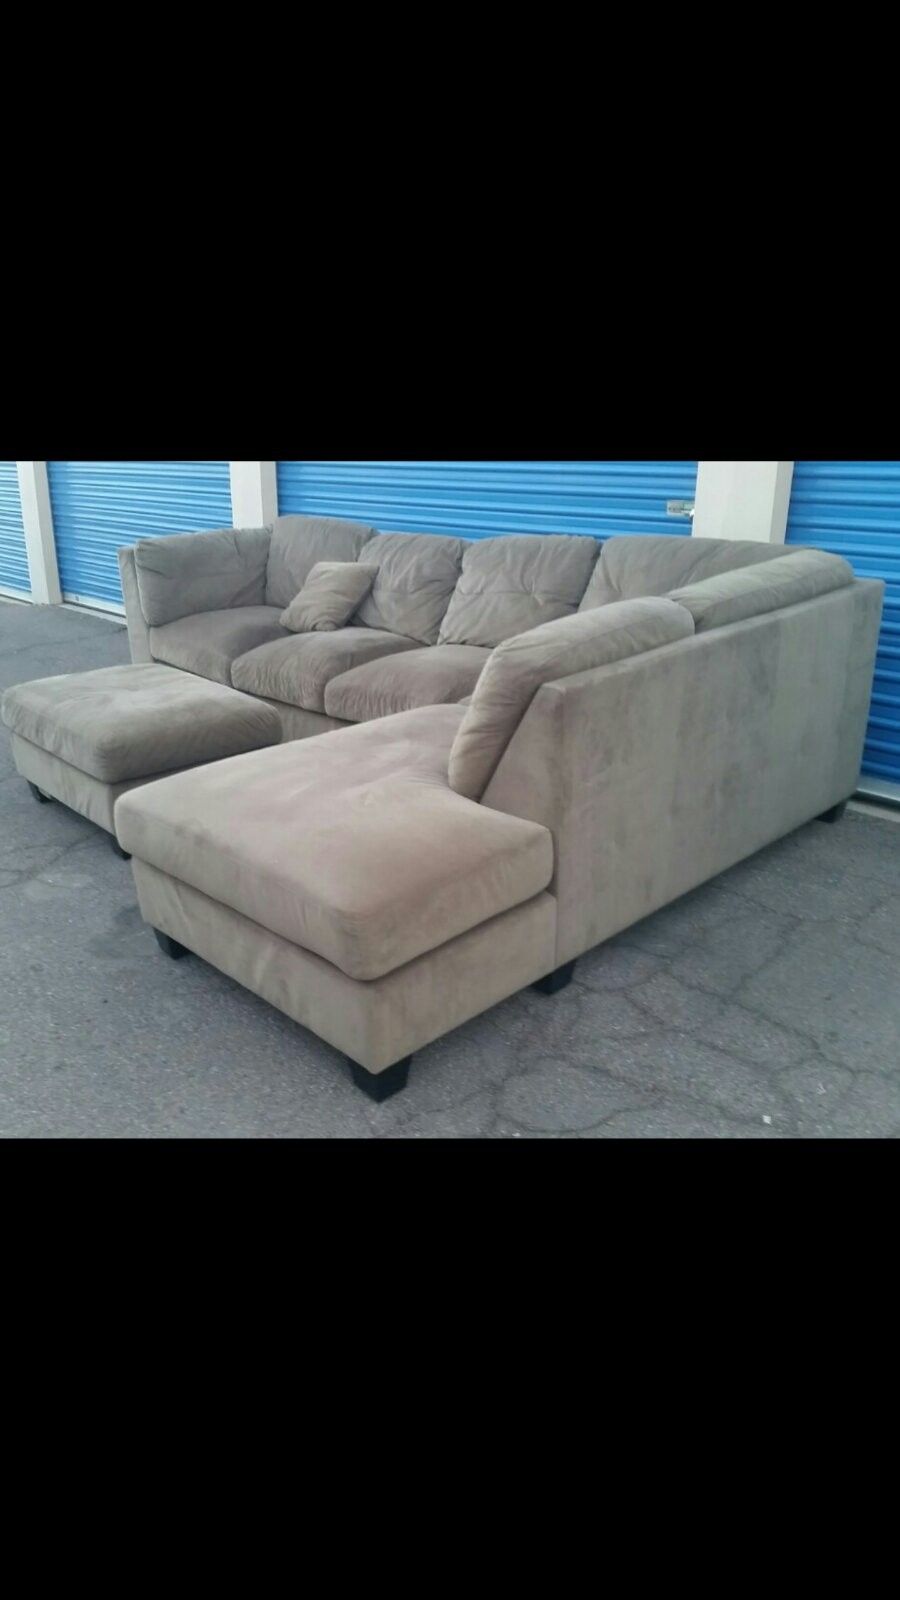 Comfortable sectional couch with ottoman,